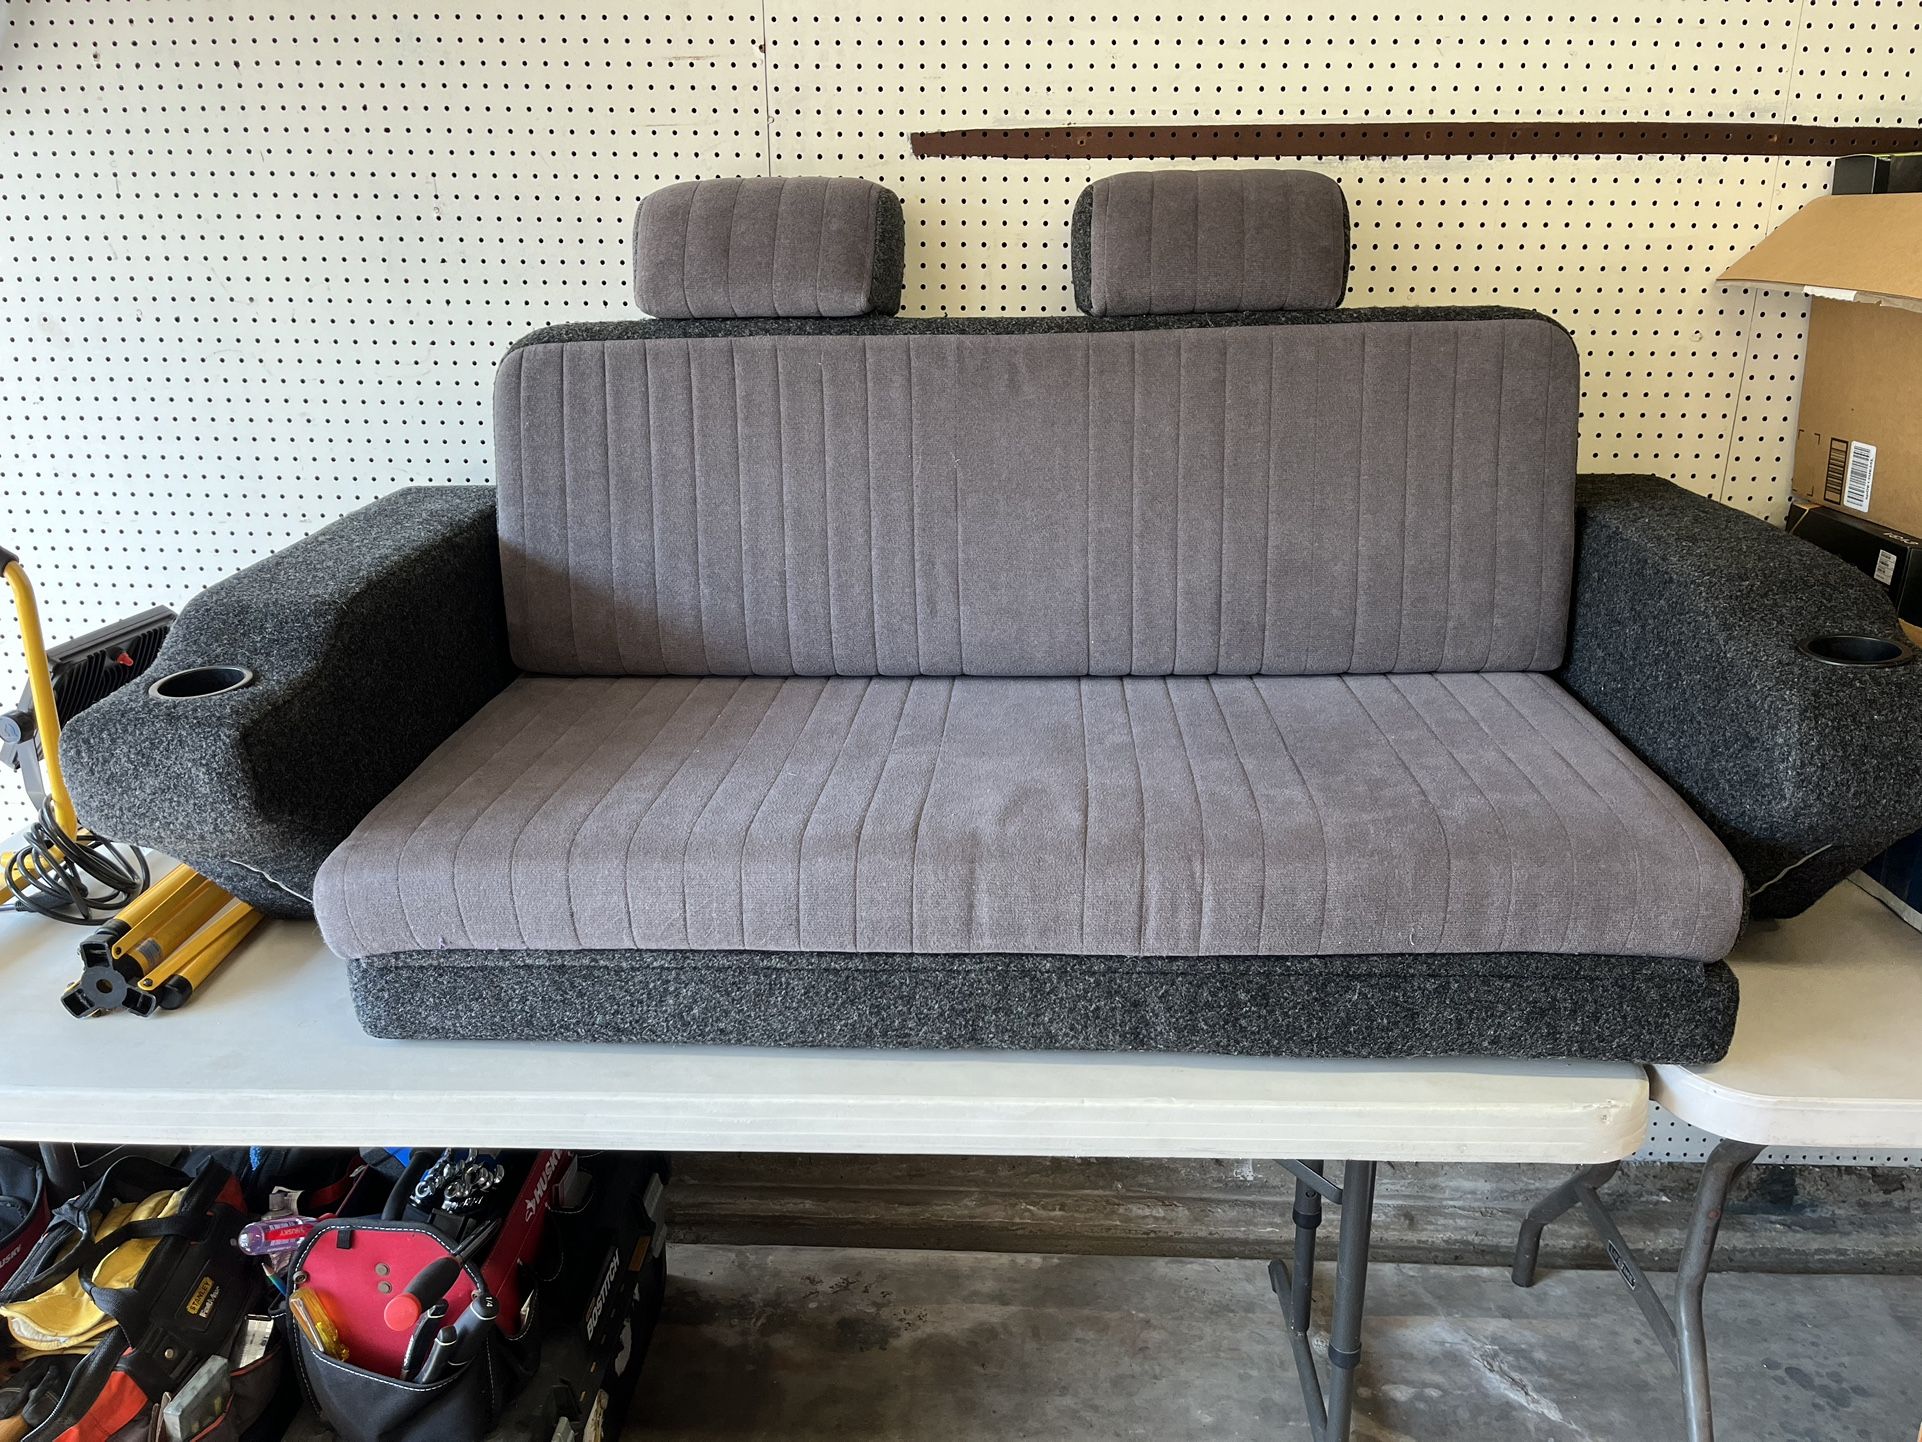 Truck Bed Couch/Bed Foldable Camping